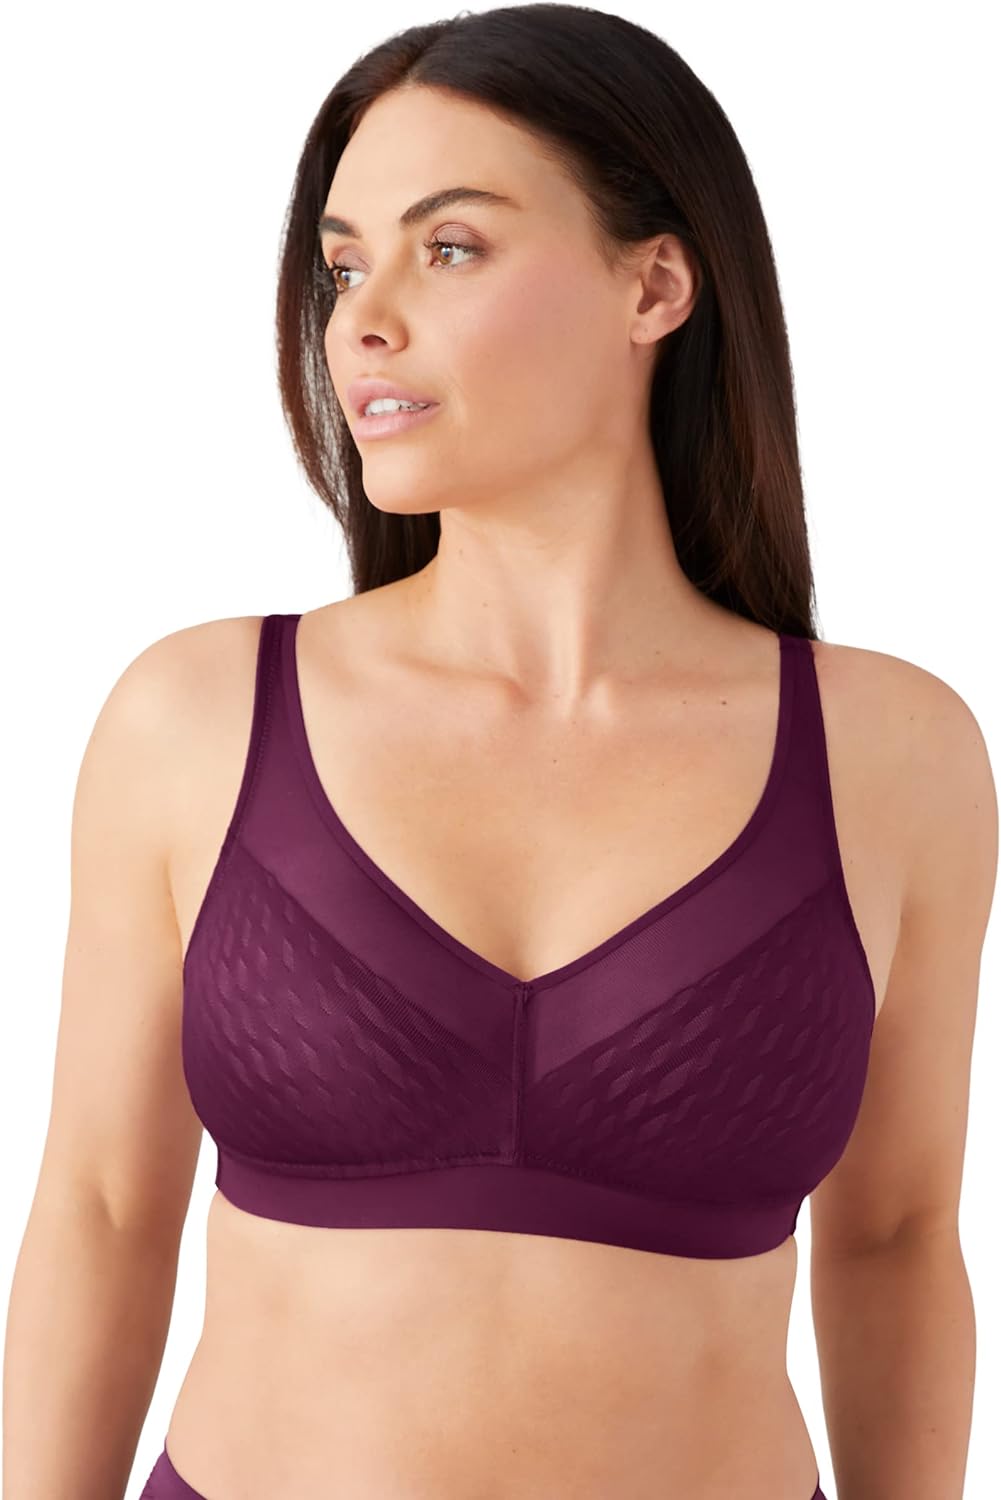 Wacoal Elevated Allure Wire Free Bra ROSE DUST buy for the best price CAD$  88.00 - Canada and U.S. delivery – Bralissimo